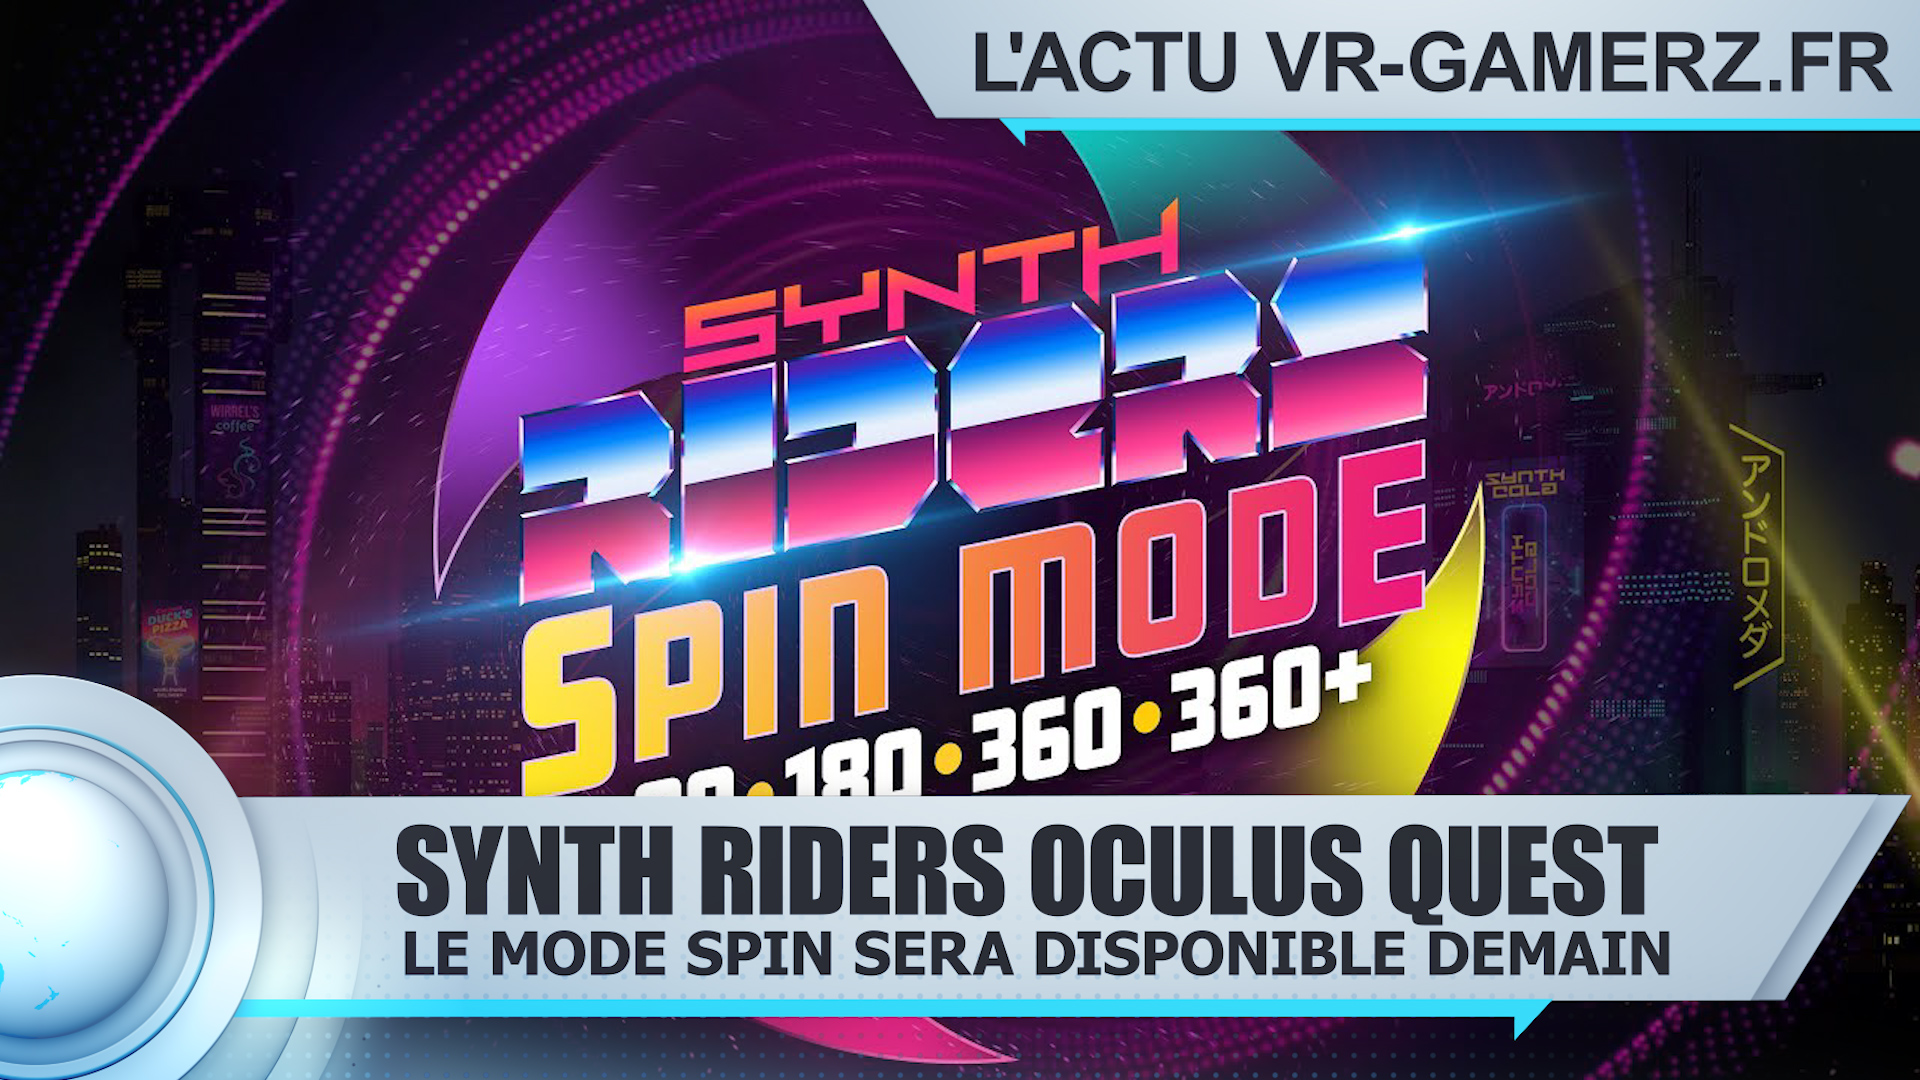 Synth Riders Oculus quest : Le mode Spin sera disponible demain